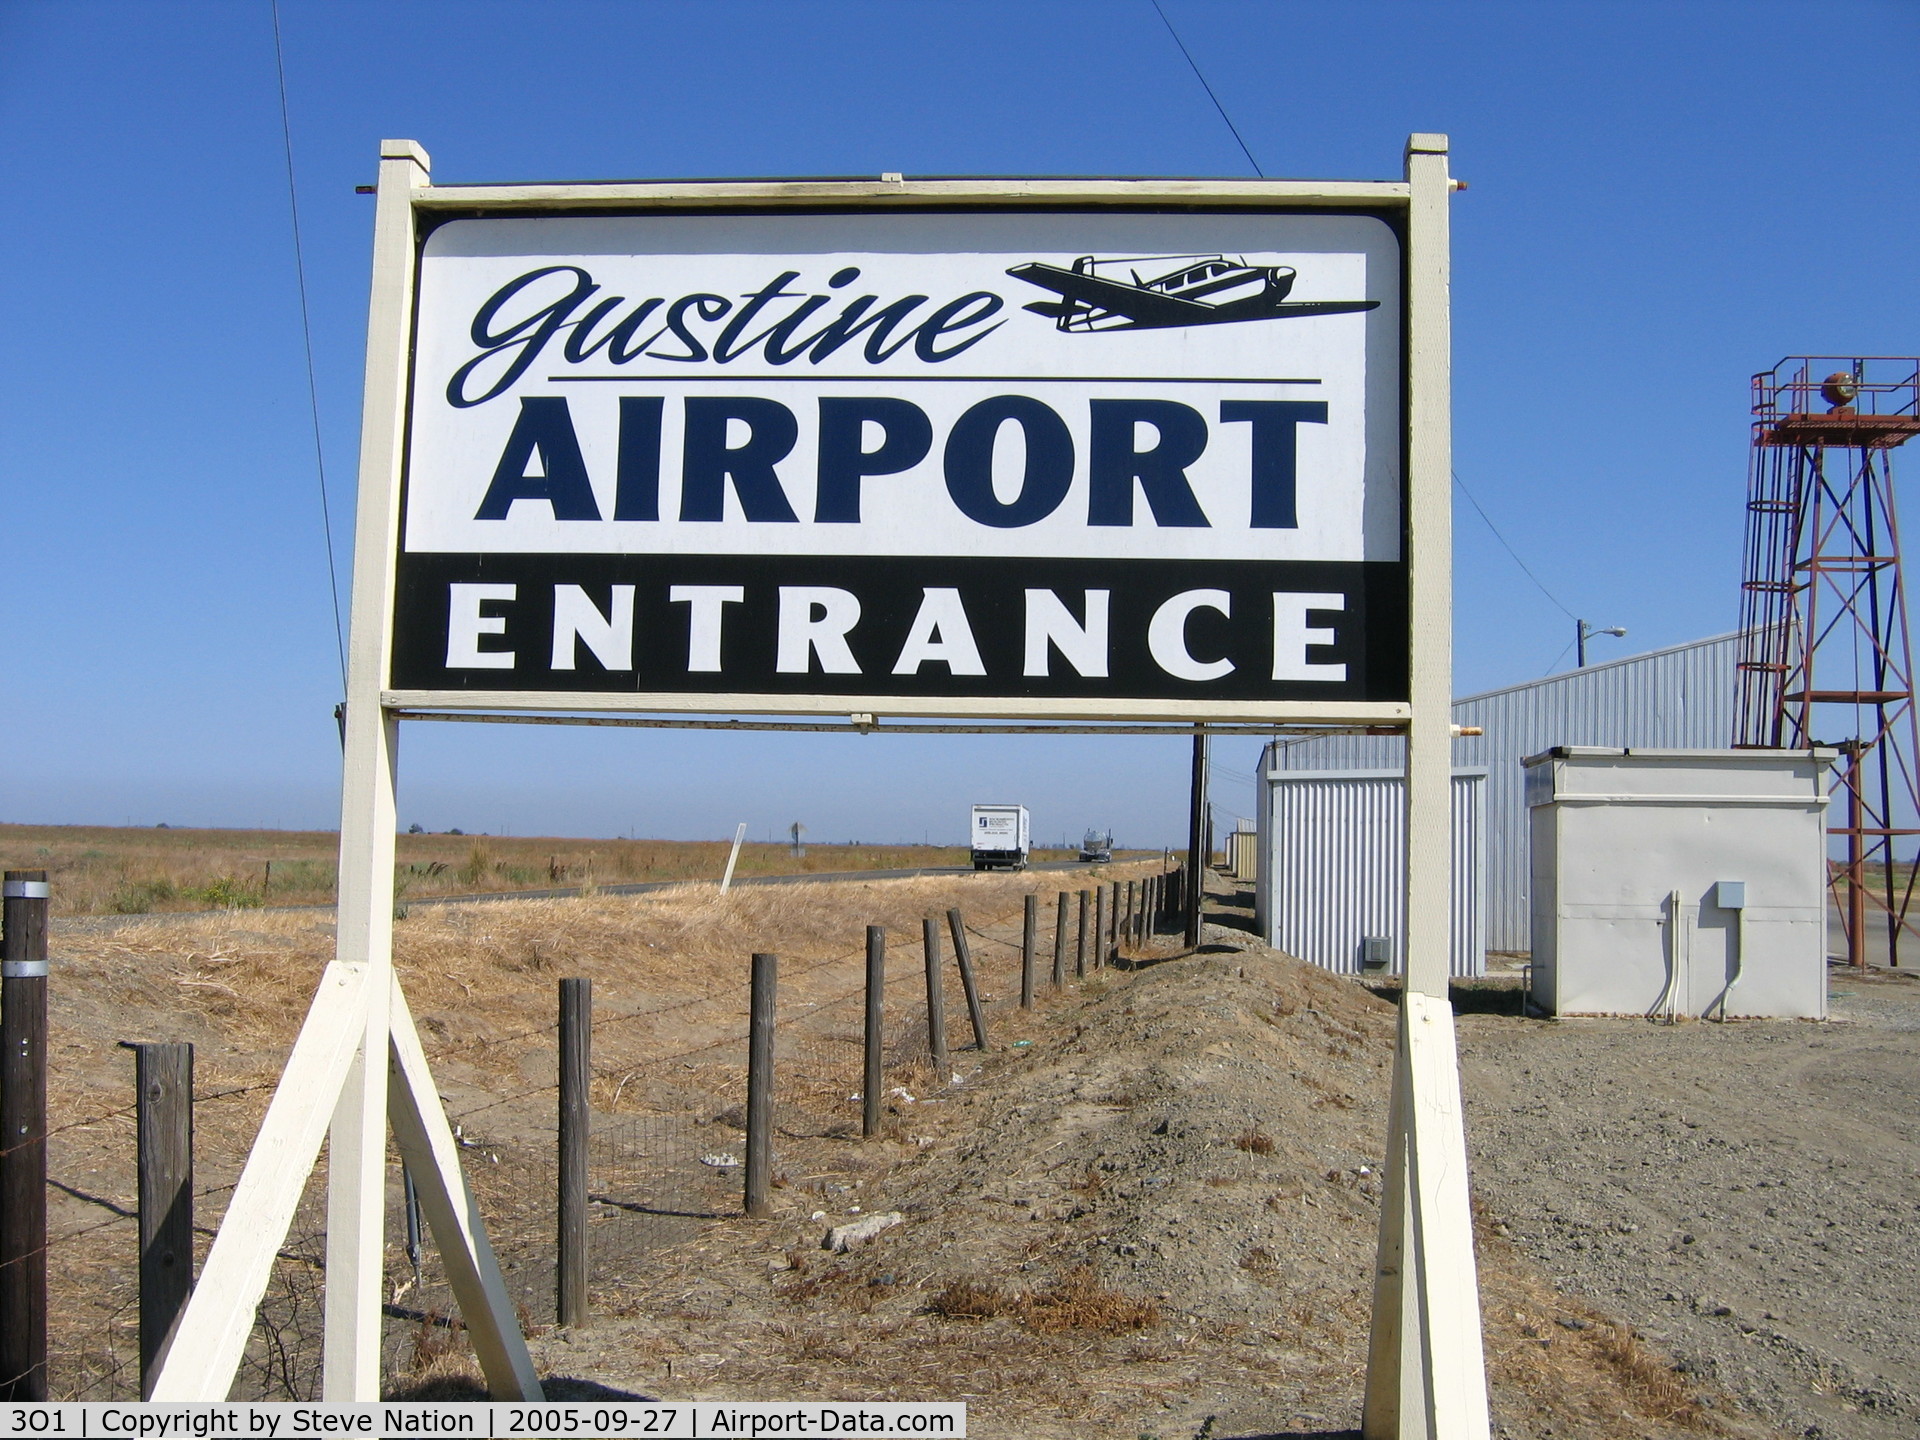 Gustine Airport (3O1) - Welcome sign at Gustine Airport, Merced County, CA